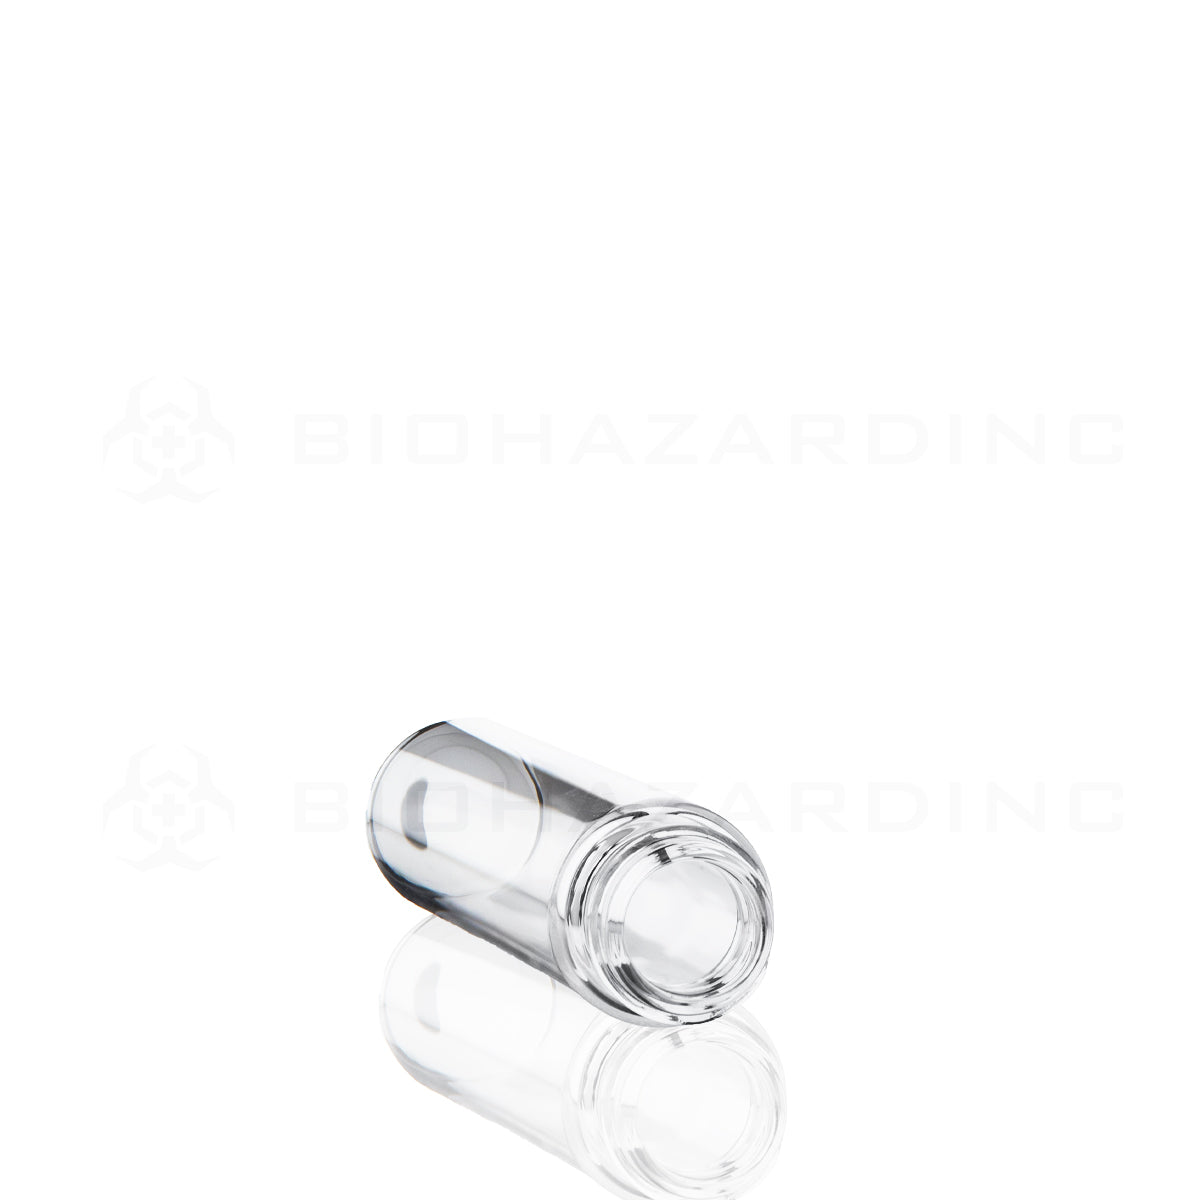 Glass Vial | Clear Glass Pre-Roll Tube | 18mm - 110mm - 240 Count Child Resistant Blunt Tube Biohazard Inc   